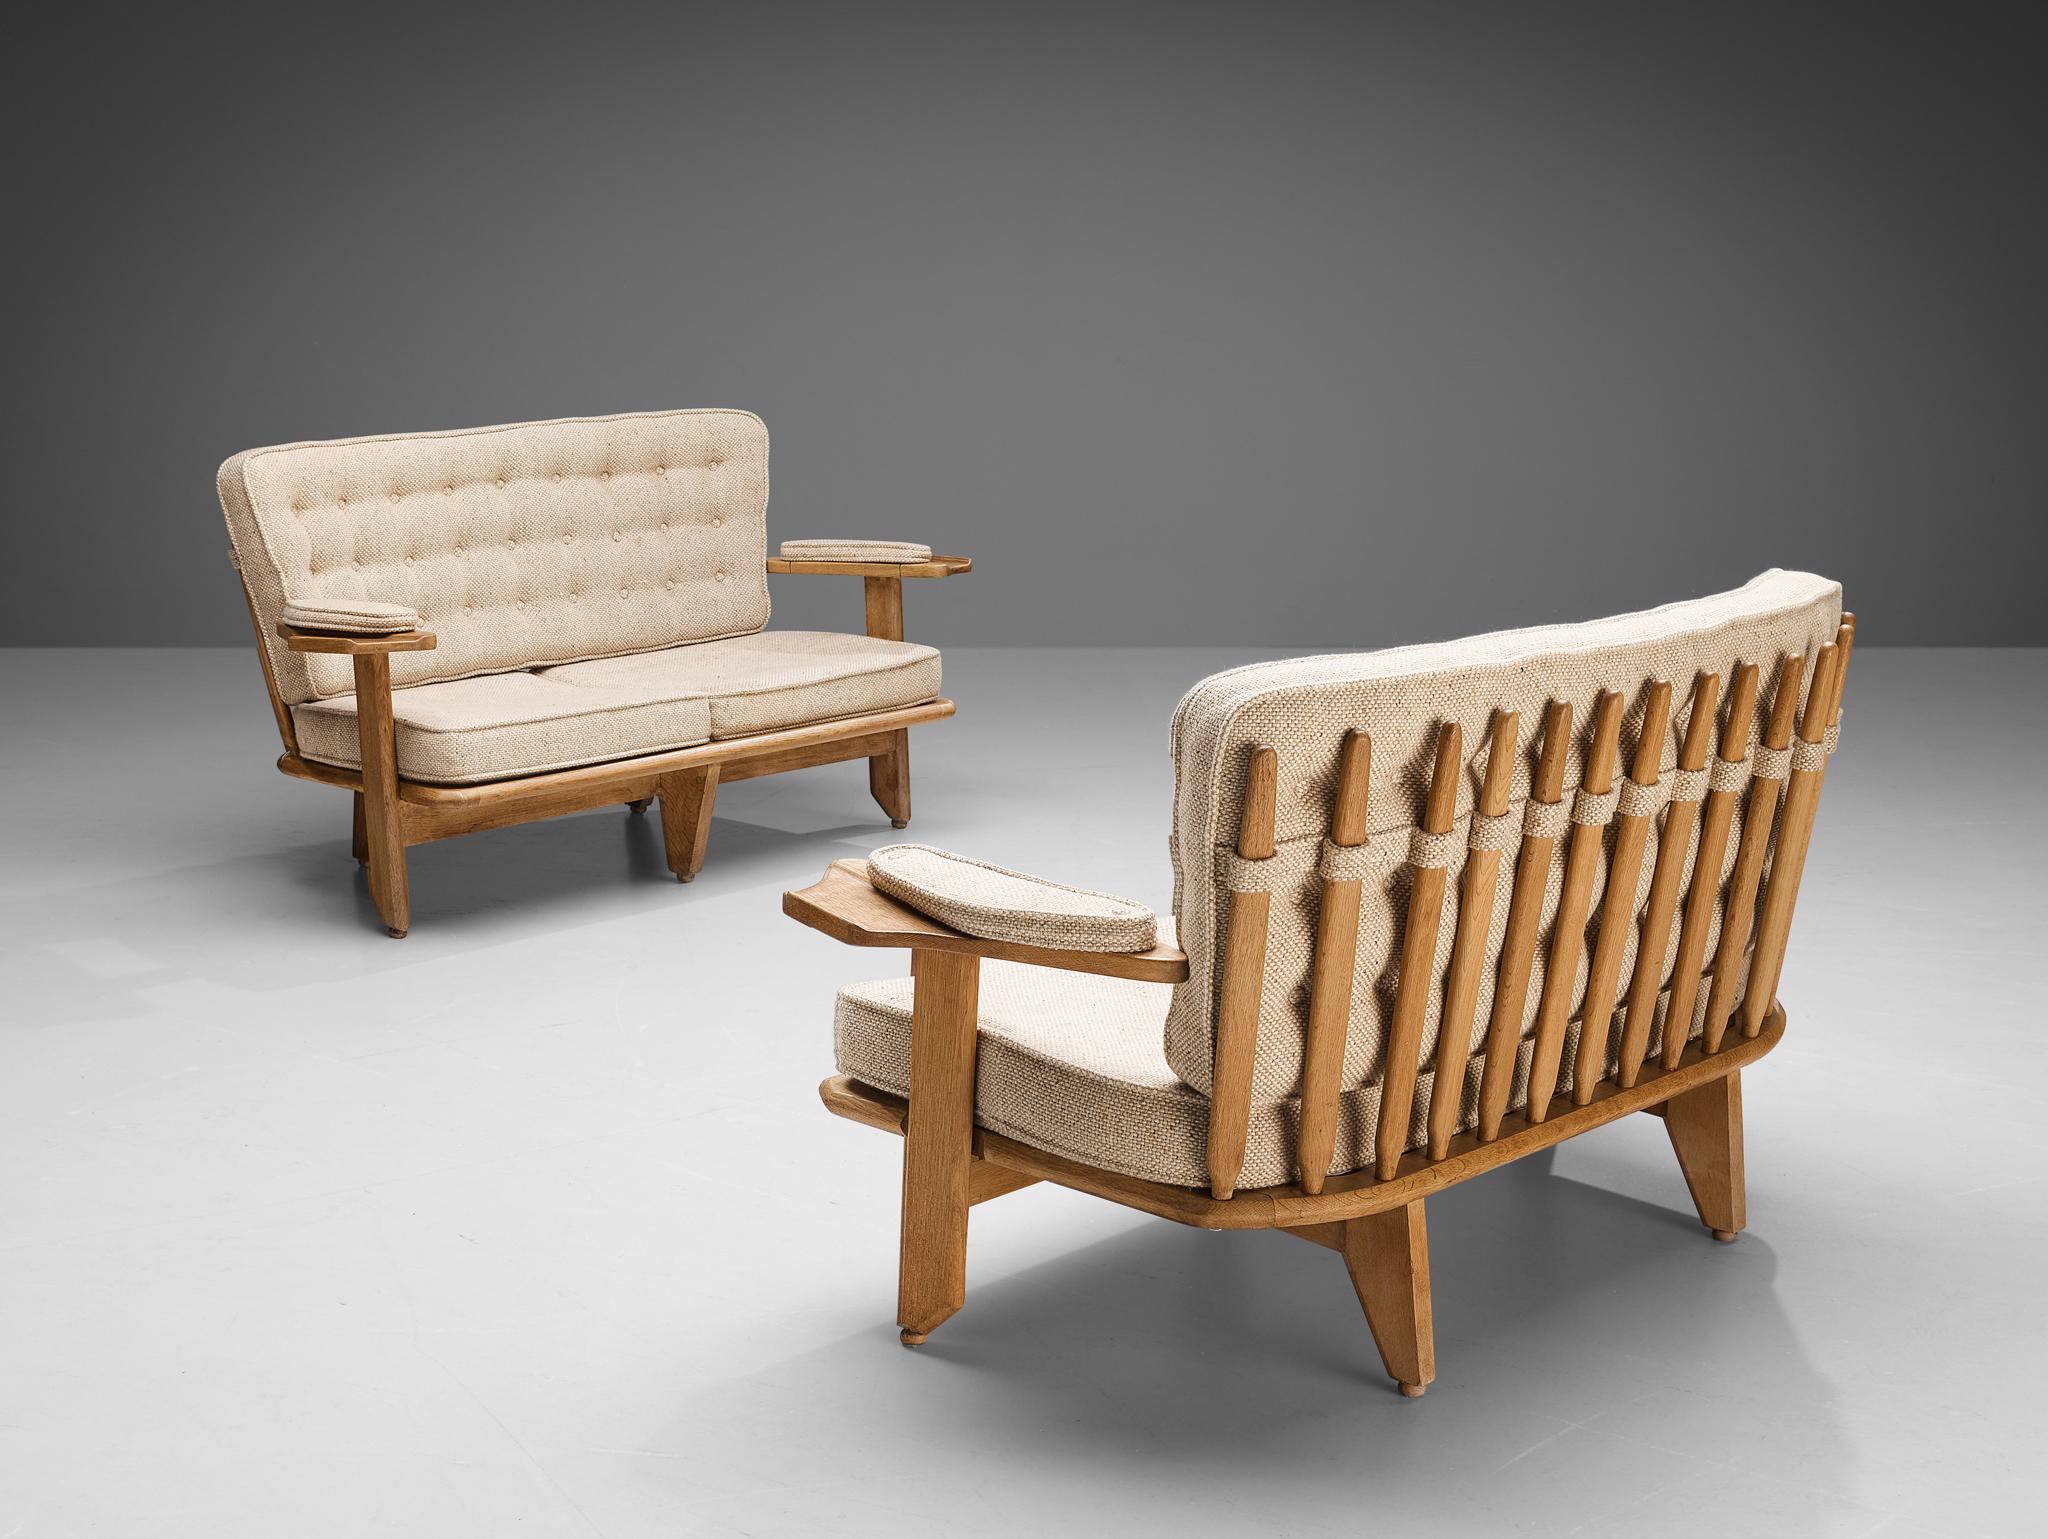 Guillerme & Chambron for Votre Maison, sofas, fabric, oak, France, 1960s

These sofas are designed by the French designer duo Jacques Chambron and Robert Guillerme. The design features a stabile construction featuring the typical characteristic